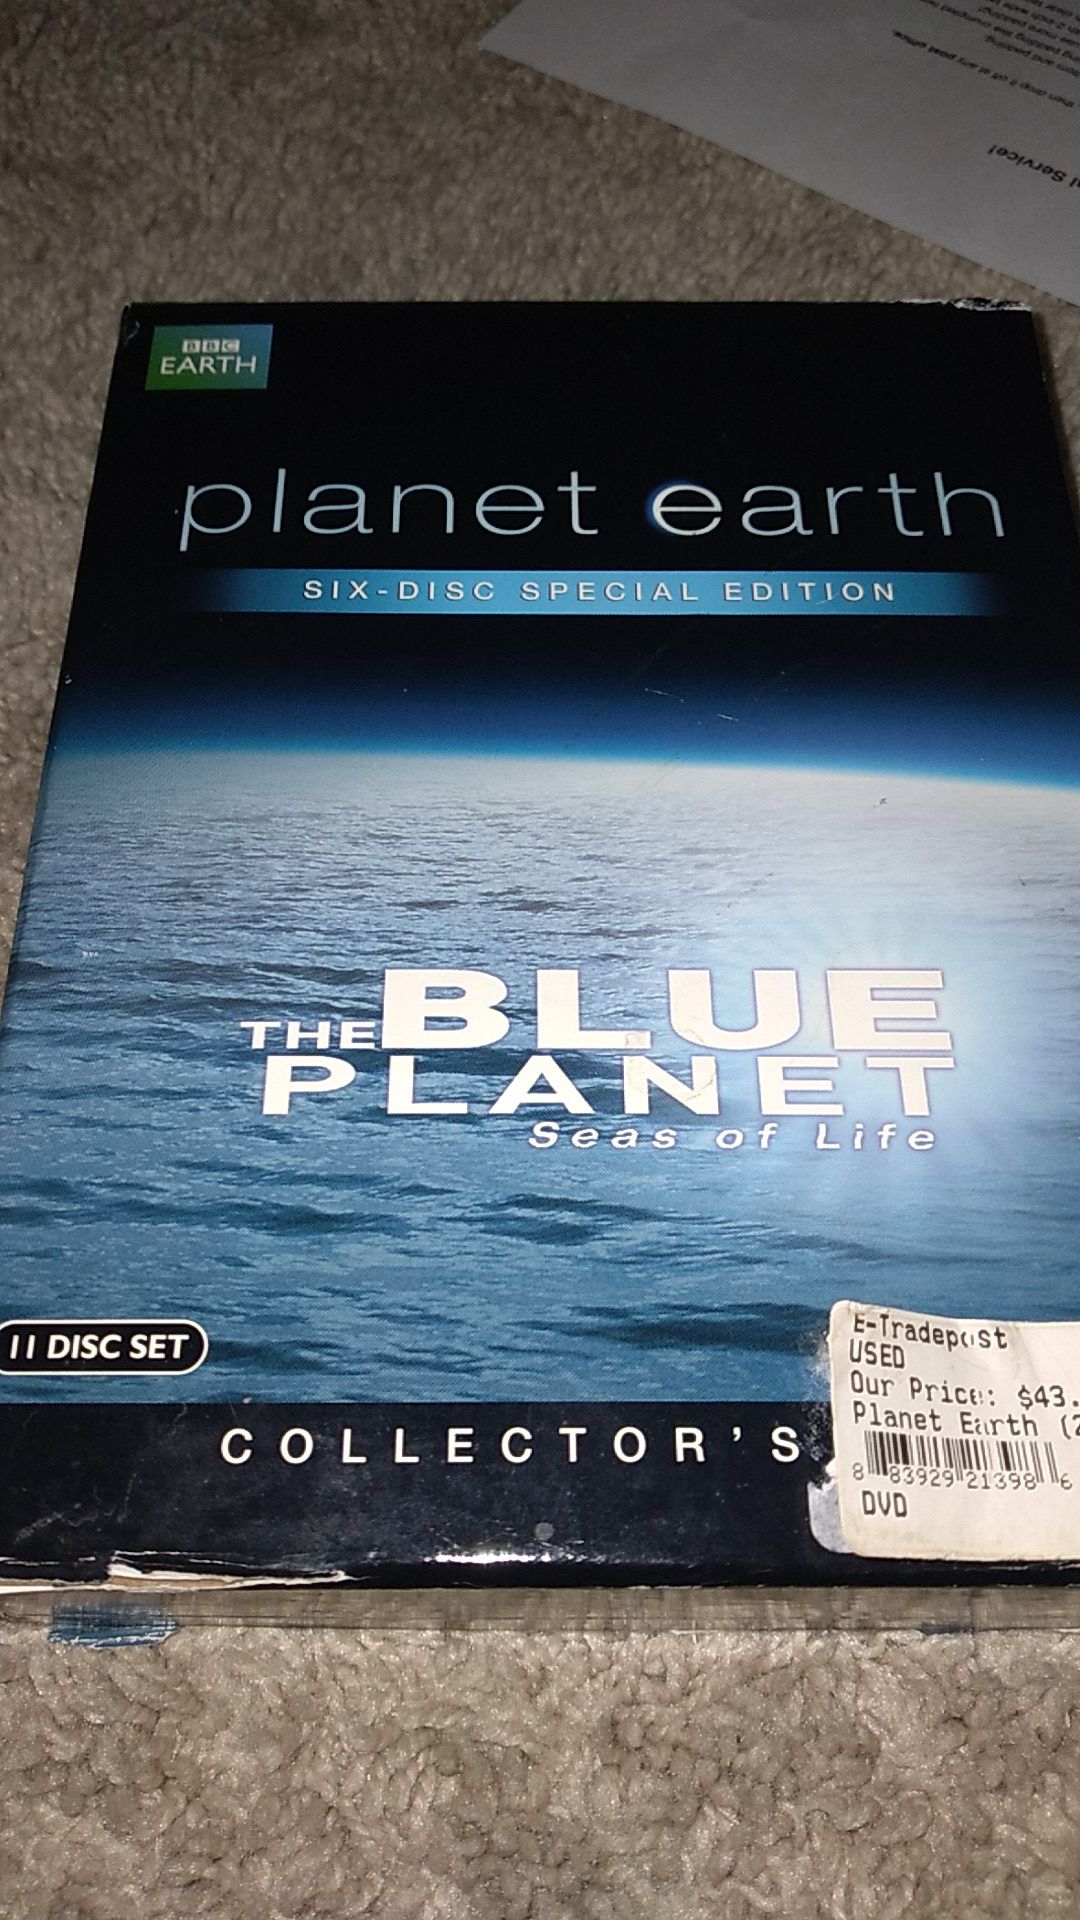 Planet Earth & The Blue Planet